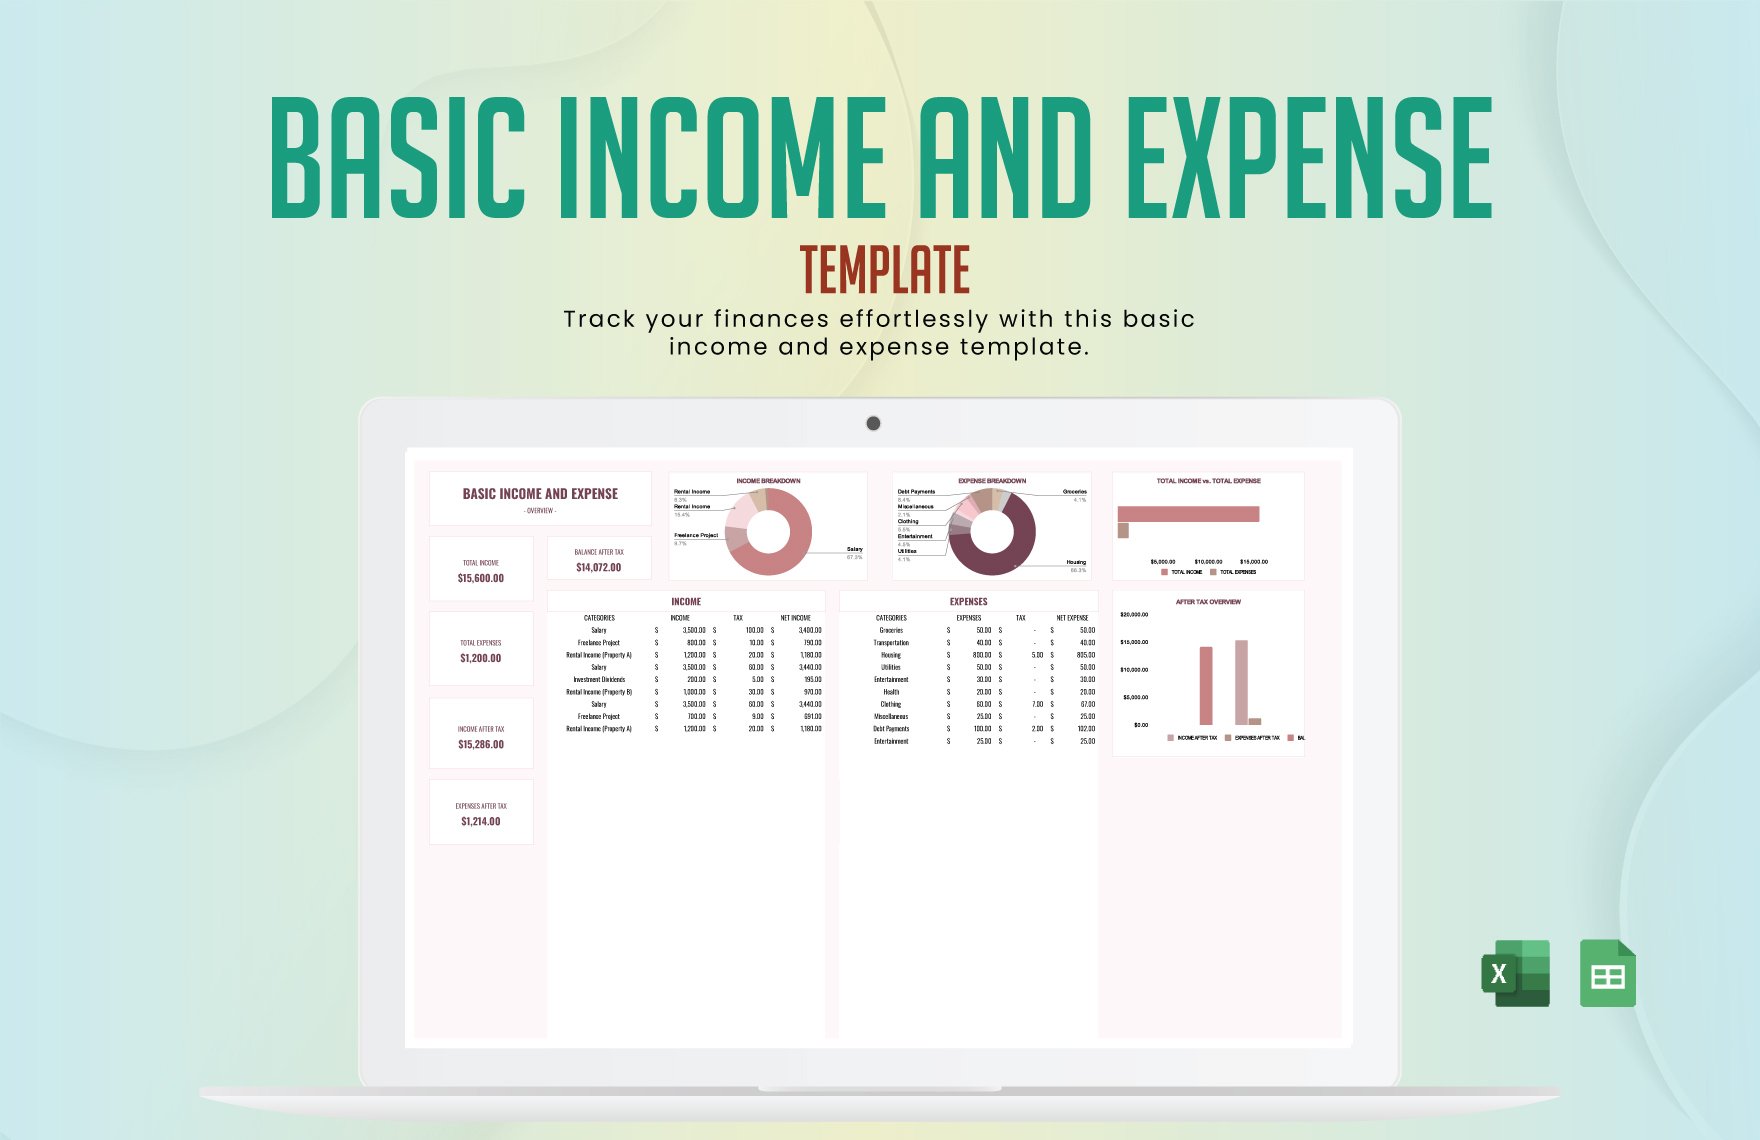 Basic income and expense template in Excel, Google Sheets